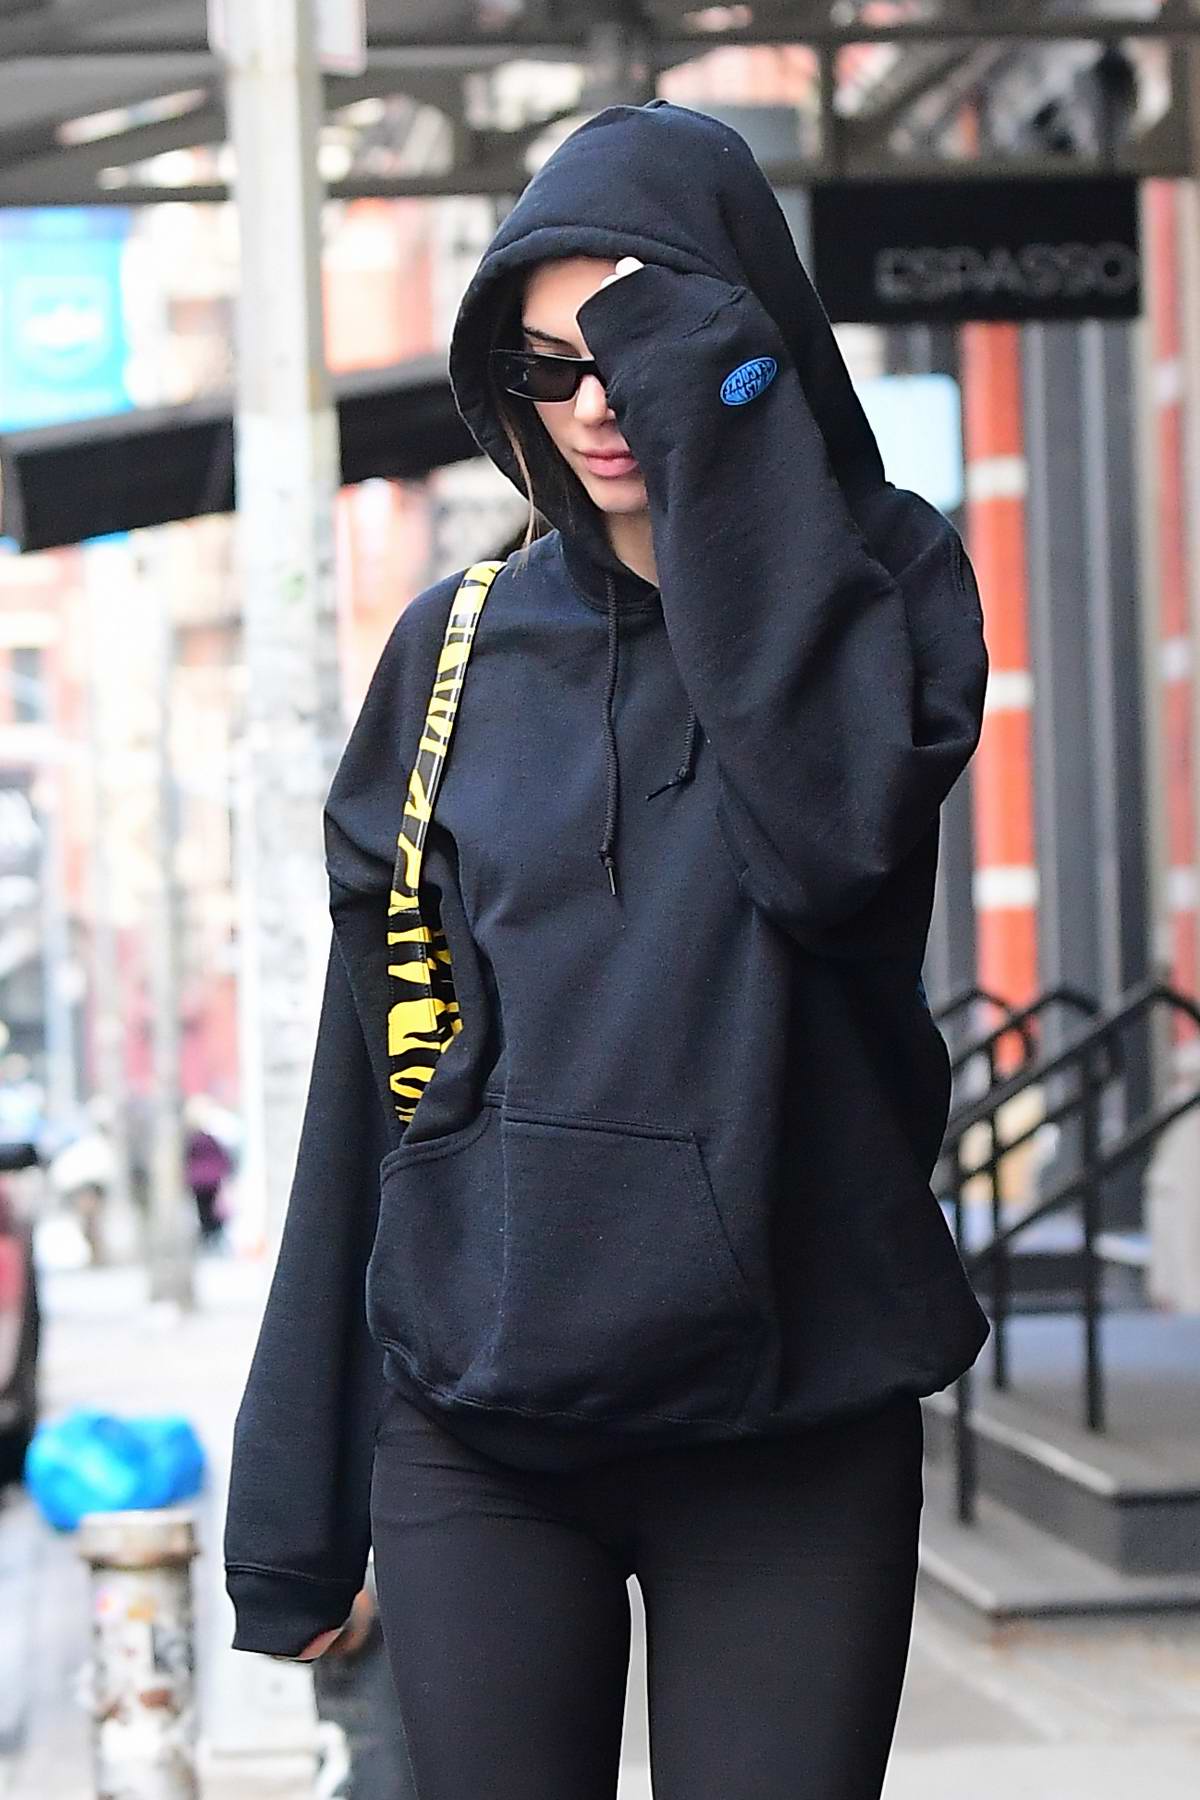 https://www.celebsfirst.com/wp-content/uploads/2020/01/kendall-jenner-rocks-a-black-hoodie-and-leggings-as-she-grabs-lunch-with-ben-simmons-at-bubbys-in-new-york-city-190120_6.jpg